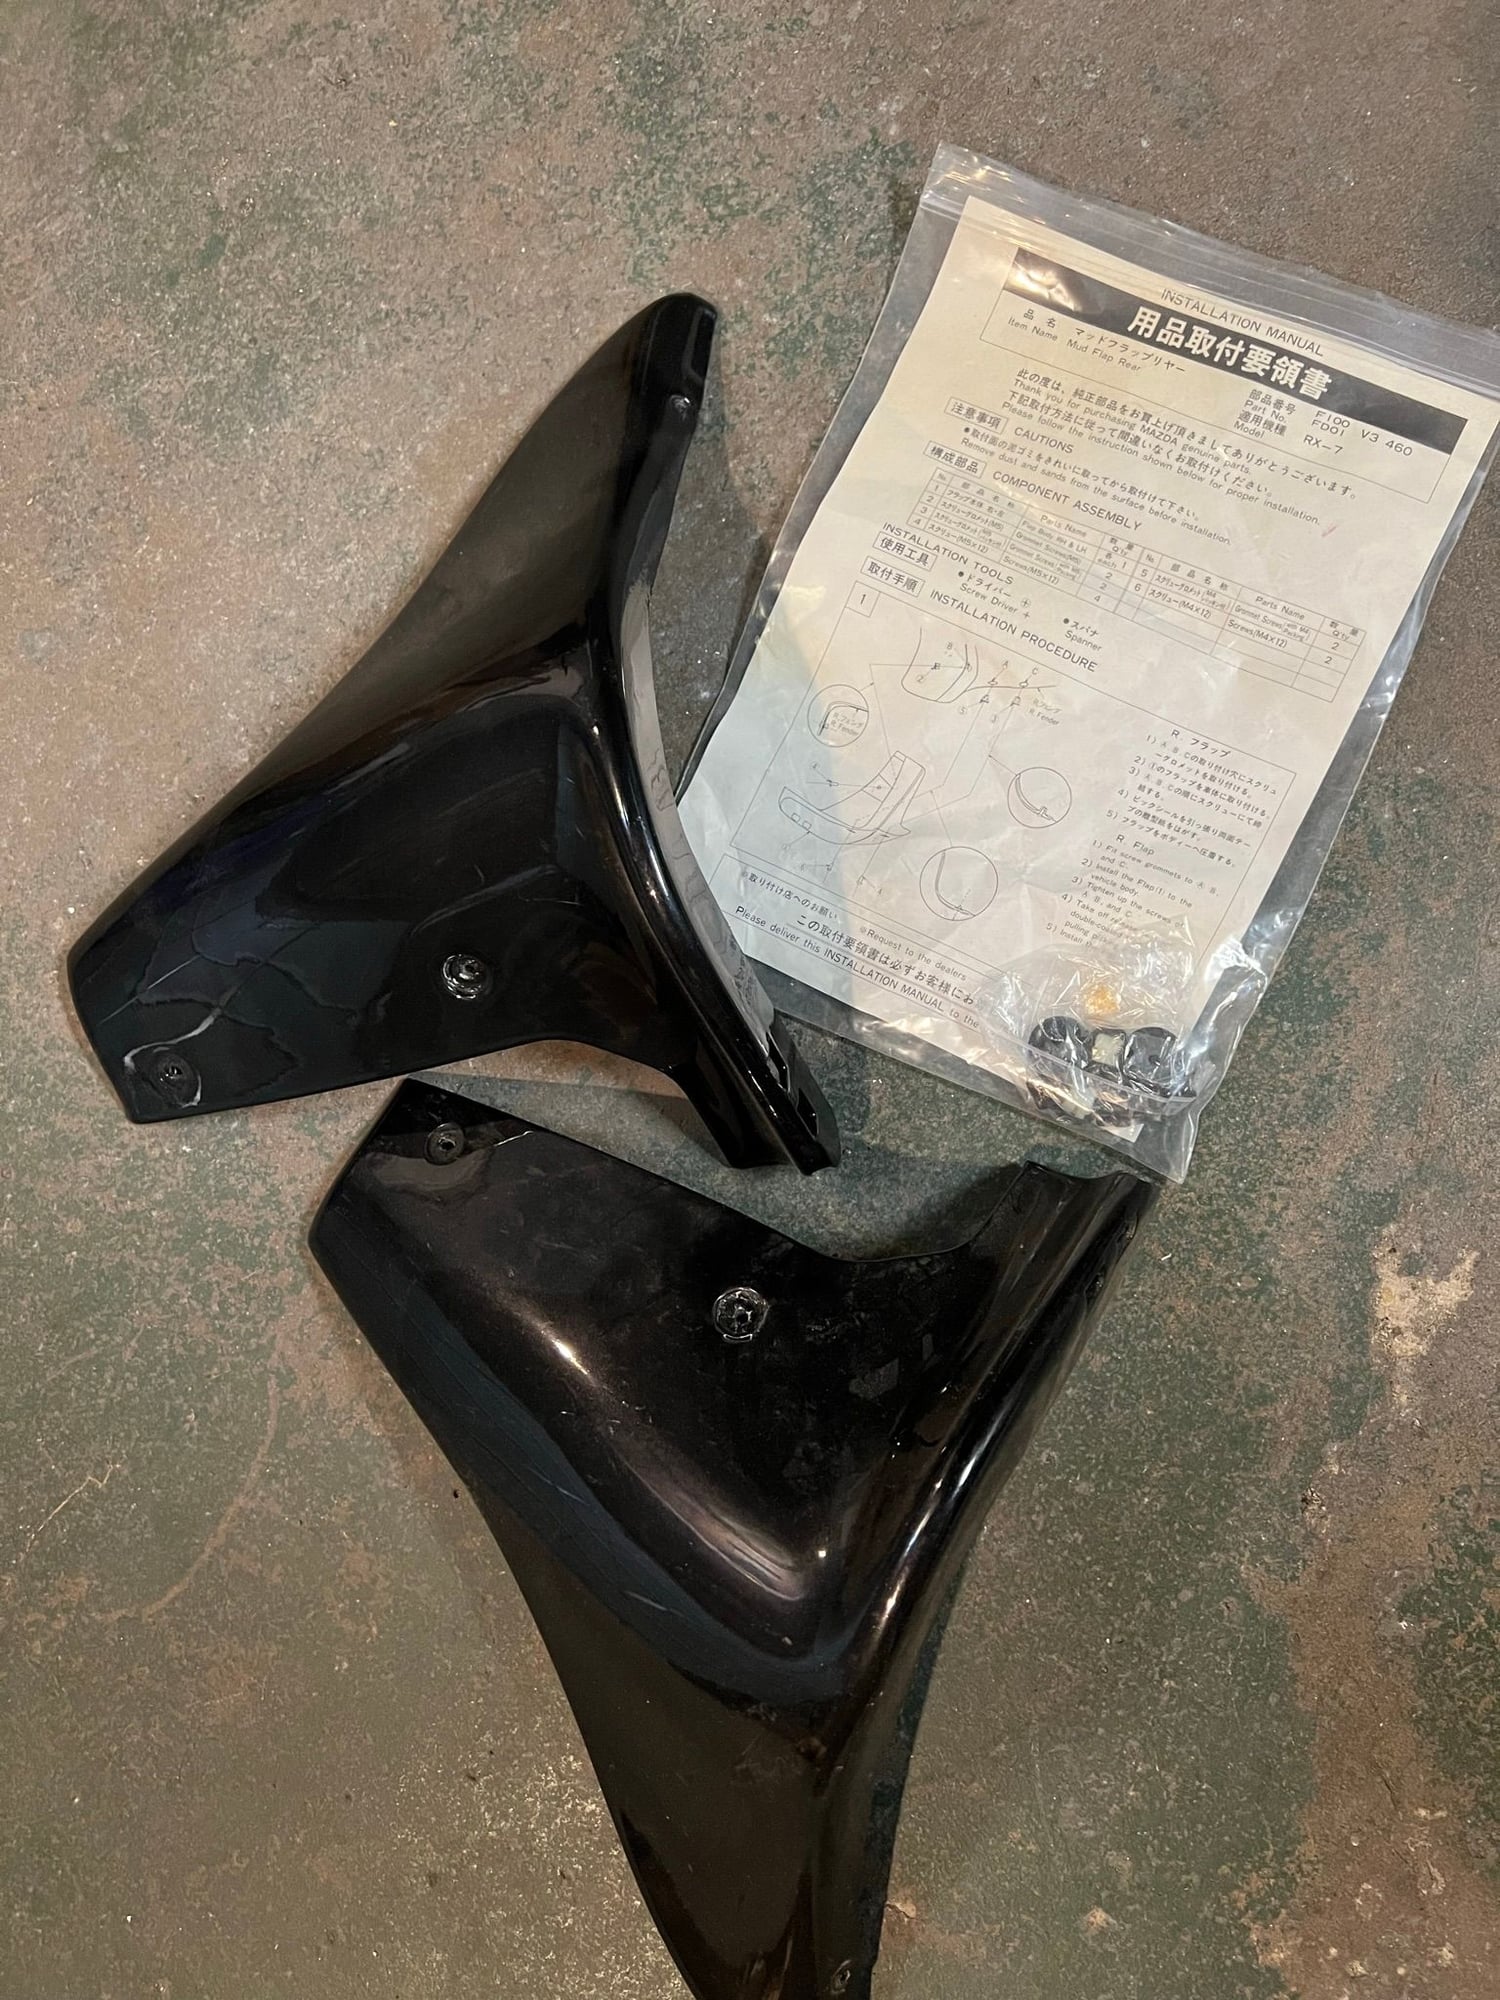 Interior/Upholstery - Moving: FD Raceshop Rollbar; AEM A/F; POLISHED Parts; R1 Suede Seats, Interior, etc. - Used - 1993 to 1995 Mazda RX-7 - Chicago, IL 60630, United States